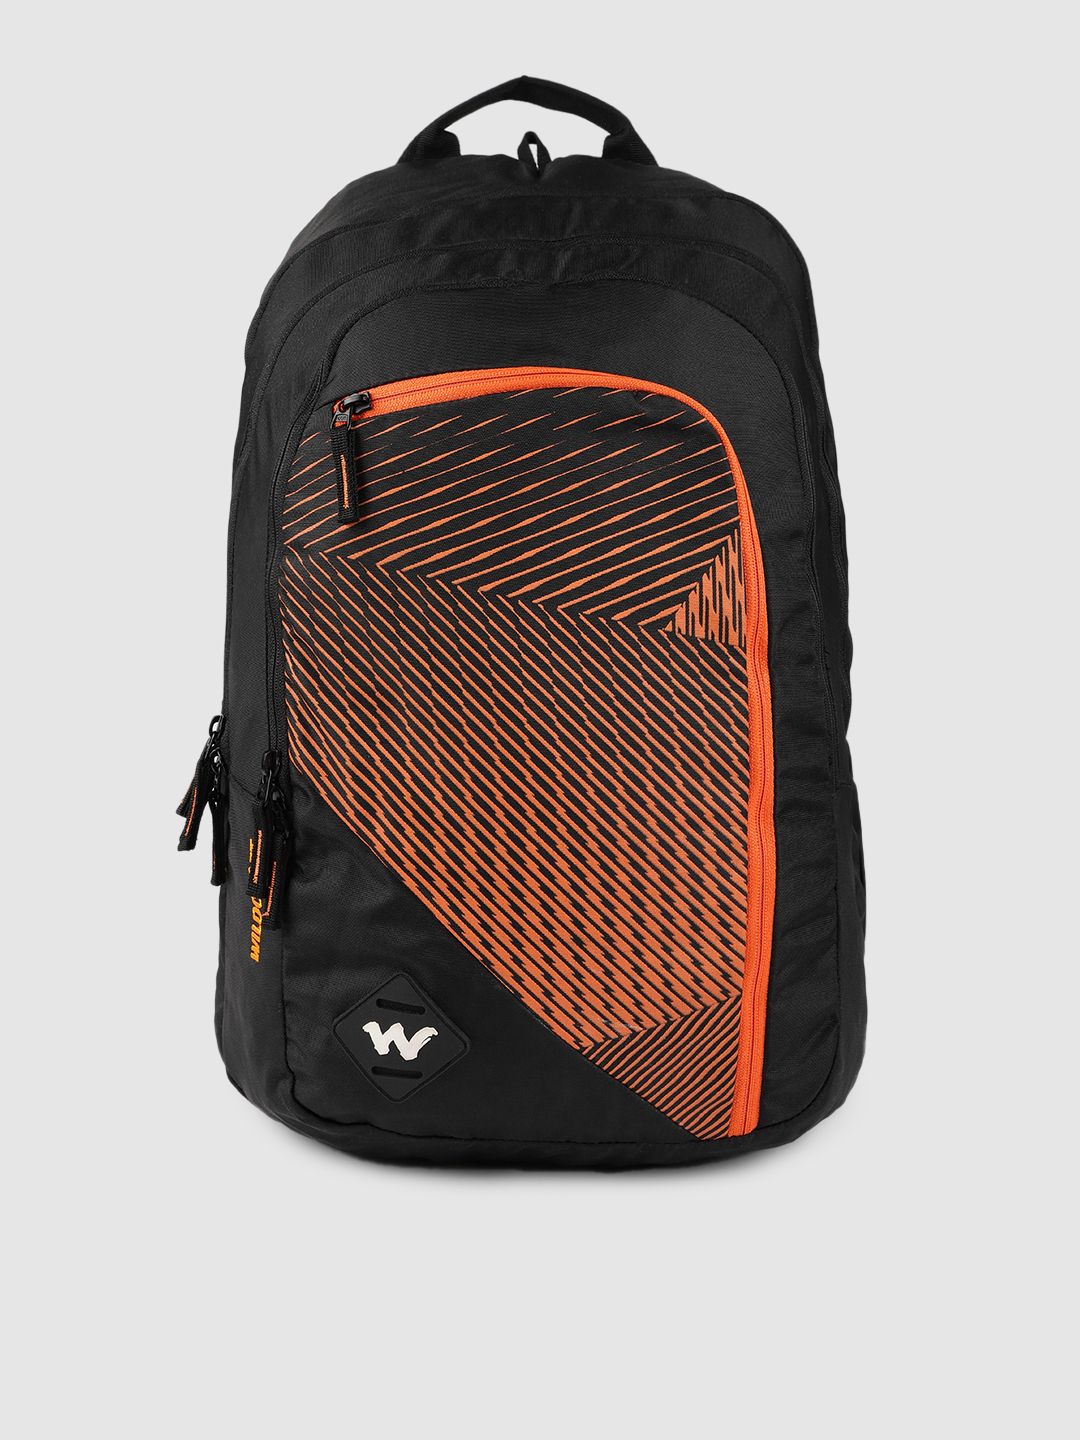 Wildcraft Unisex Black & Orange Graphic Printed Colossal Backpack Price in India